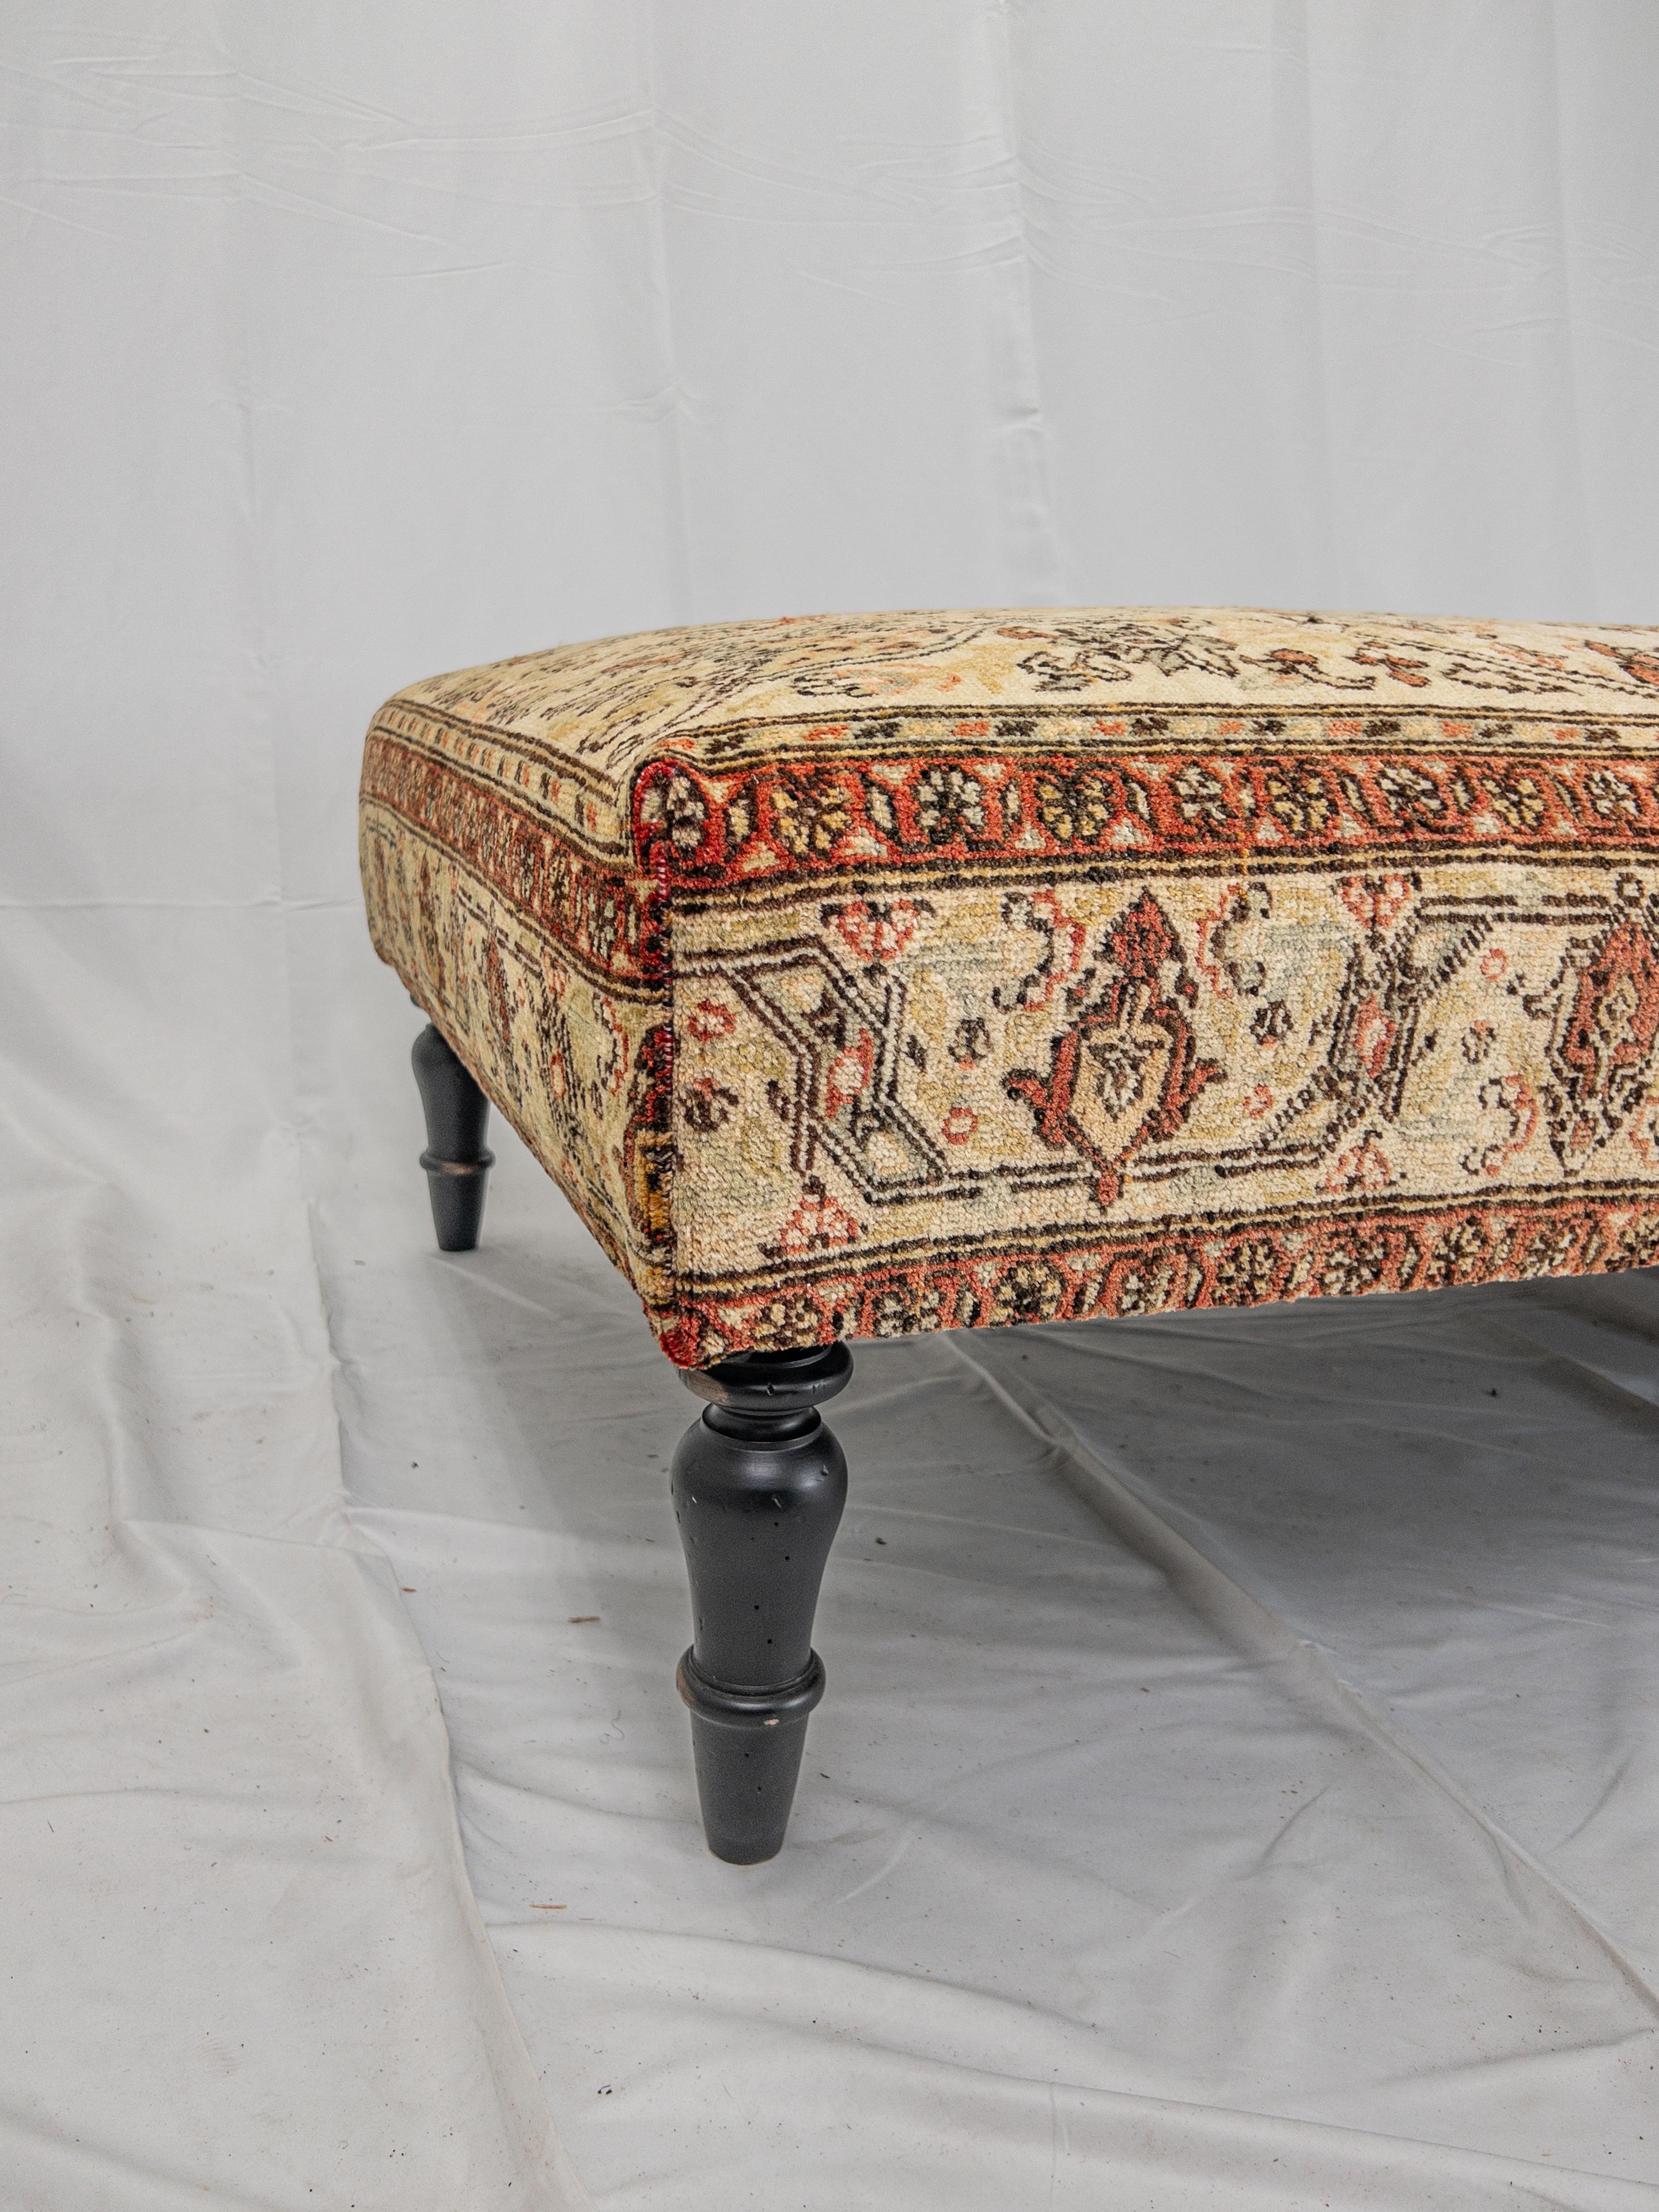 Hand-Crafted Vintage Carpet Ottoman For Sale